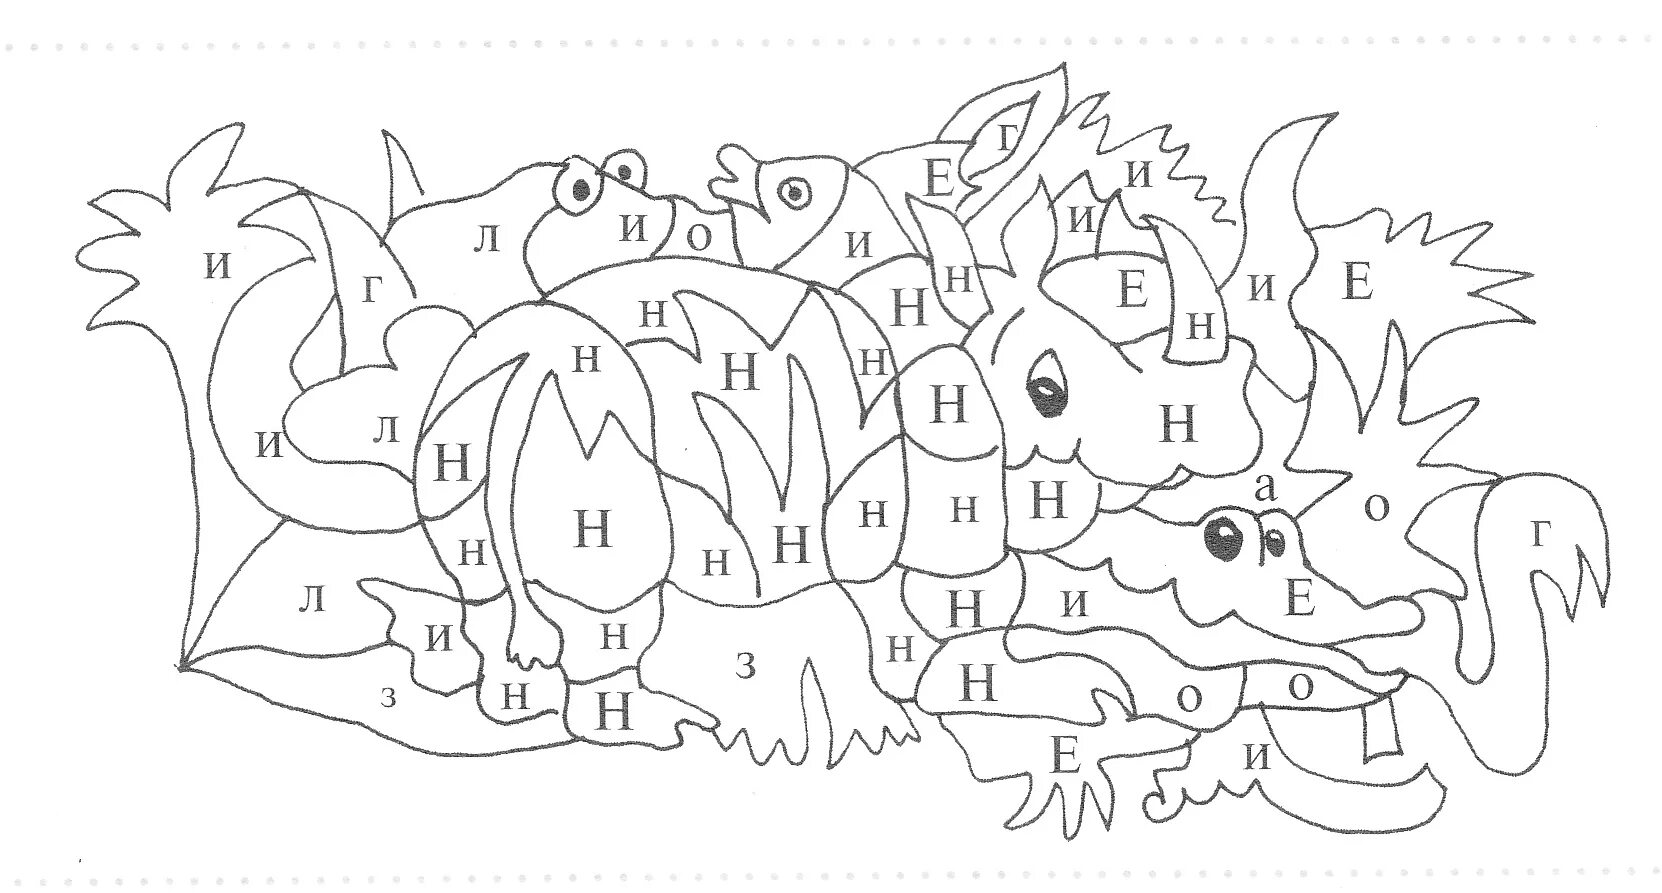 A fun coloring book for memorizing letters